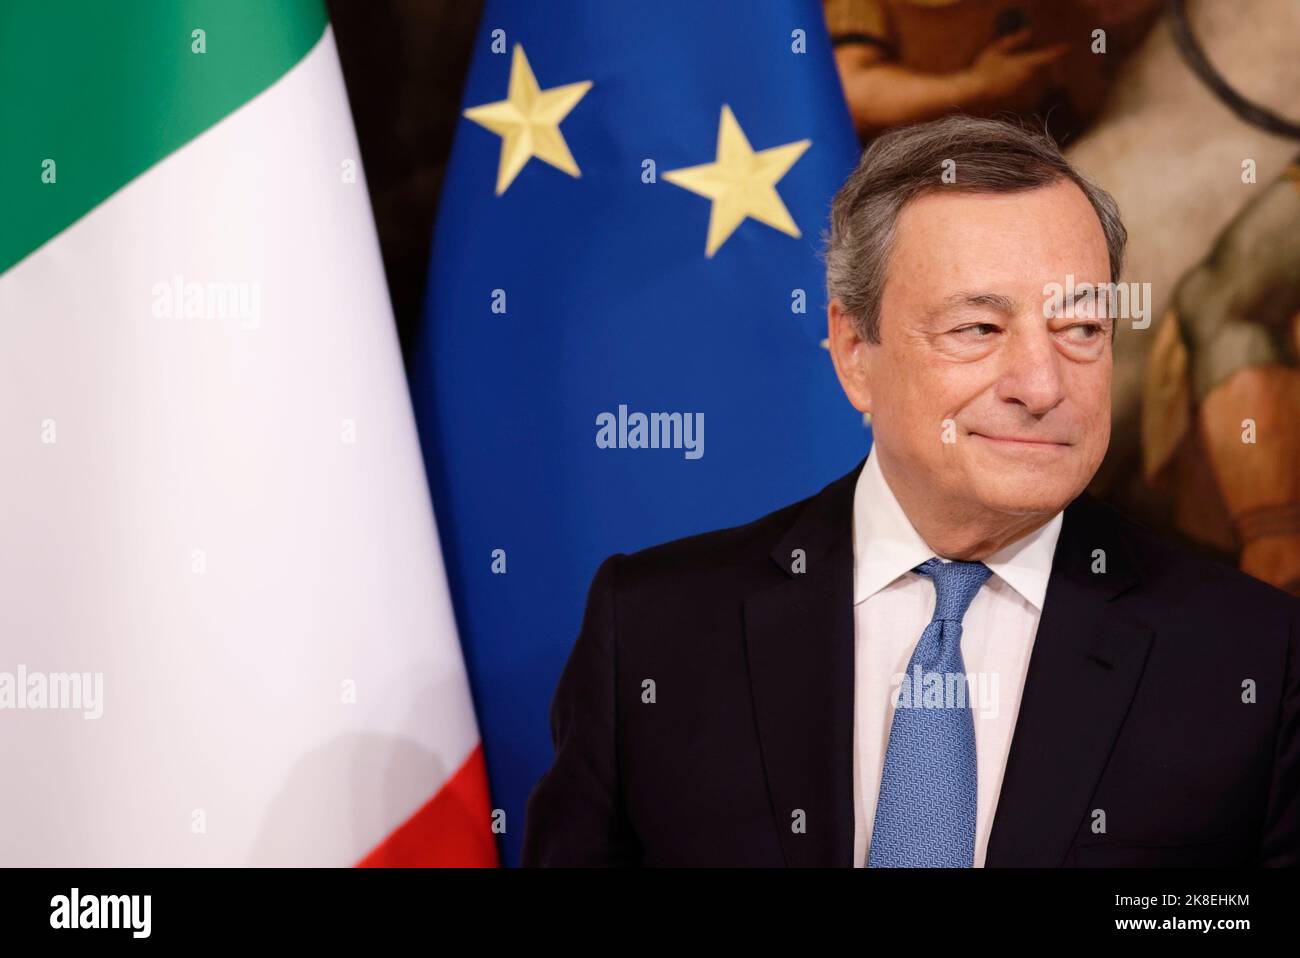 Italy's outgoing prime minister, Mario Draghi waves after the cabinet minister bell handover ceremony at Palazzo Chigi in Rome on October 23, 2022. Stock Photo